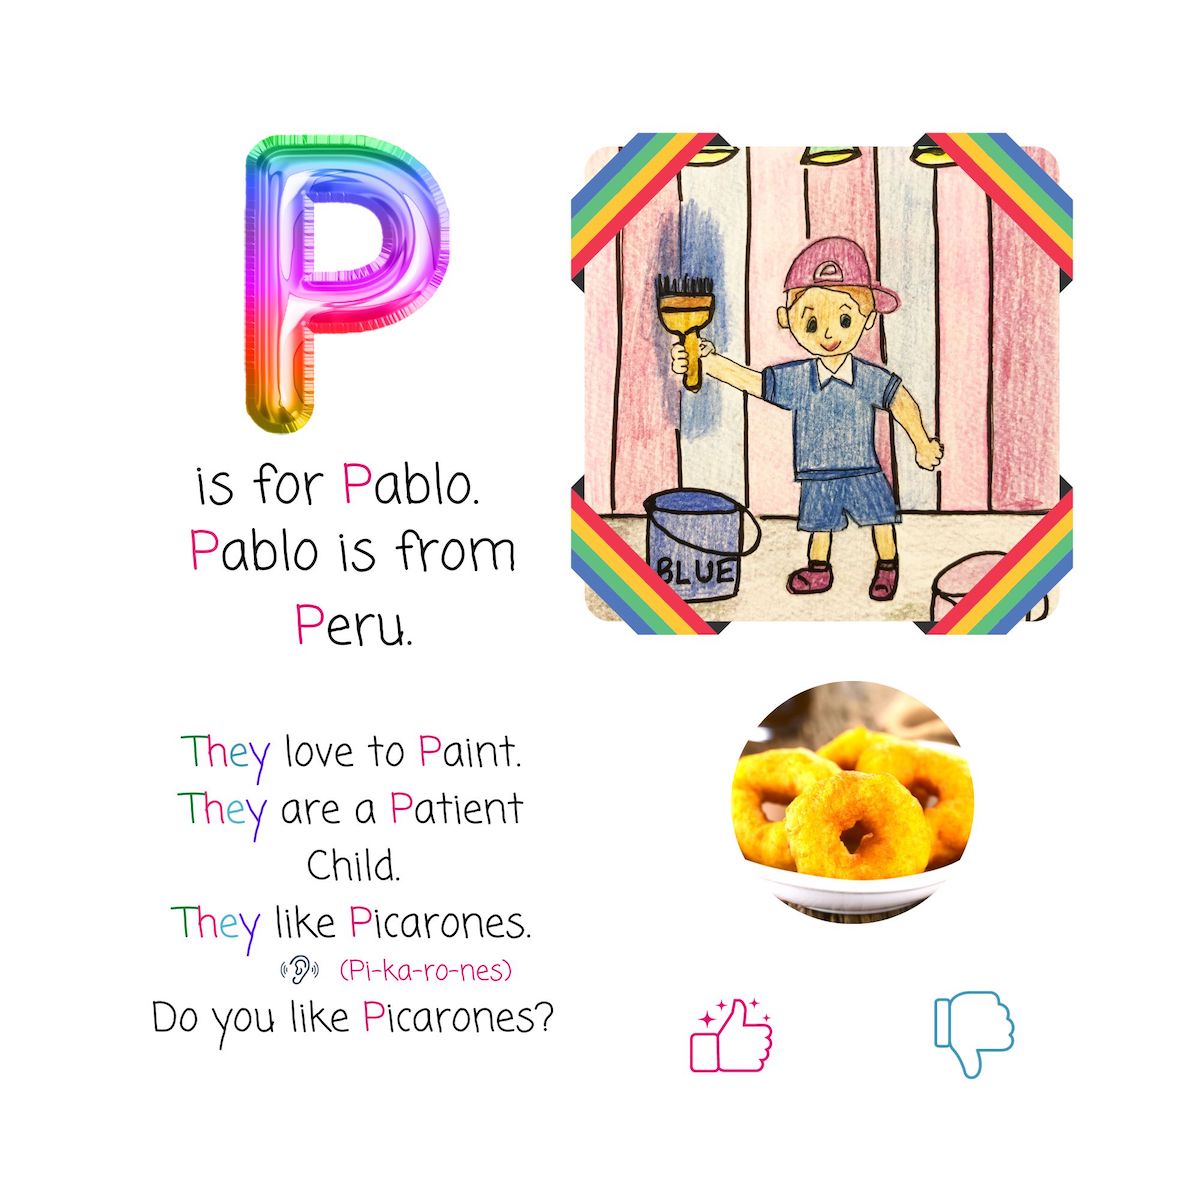 P is for Pablo. Pablo is from Peru. They love to paint. They are a patient child. They like picarones. Do you like picarones?